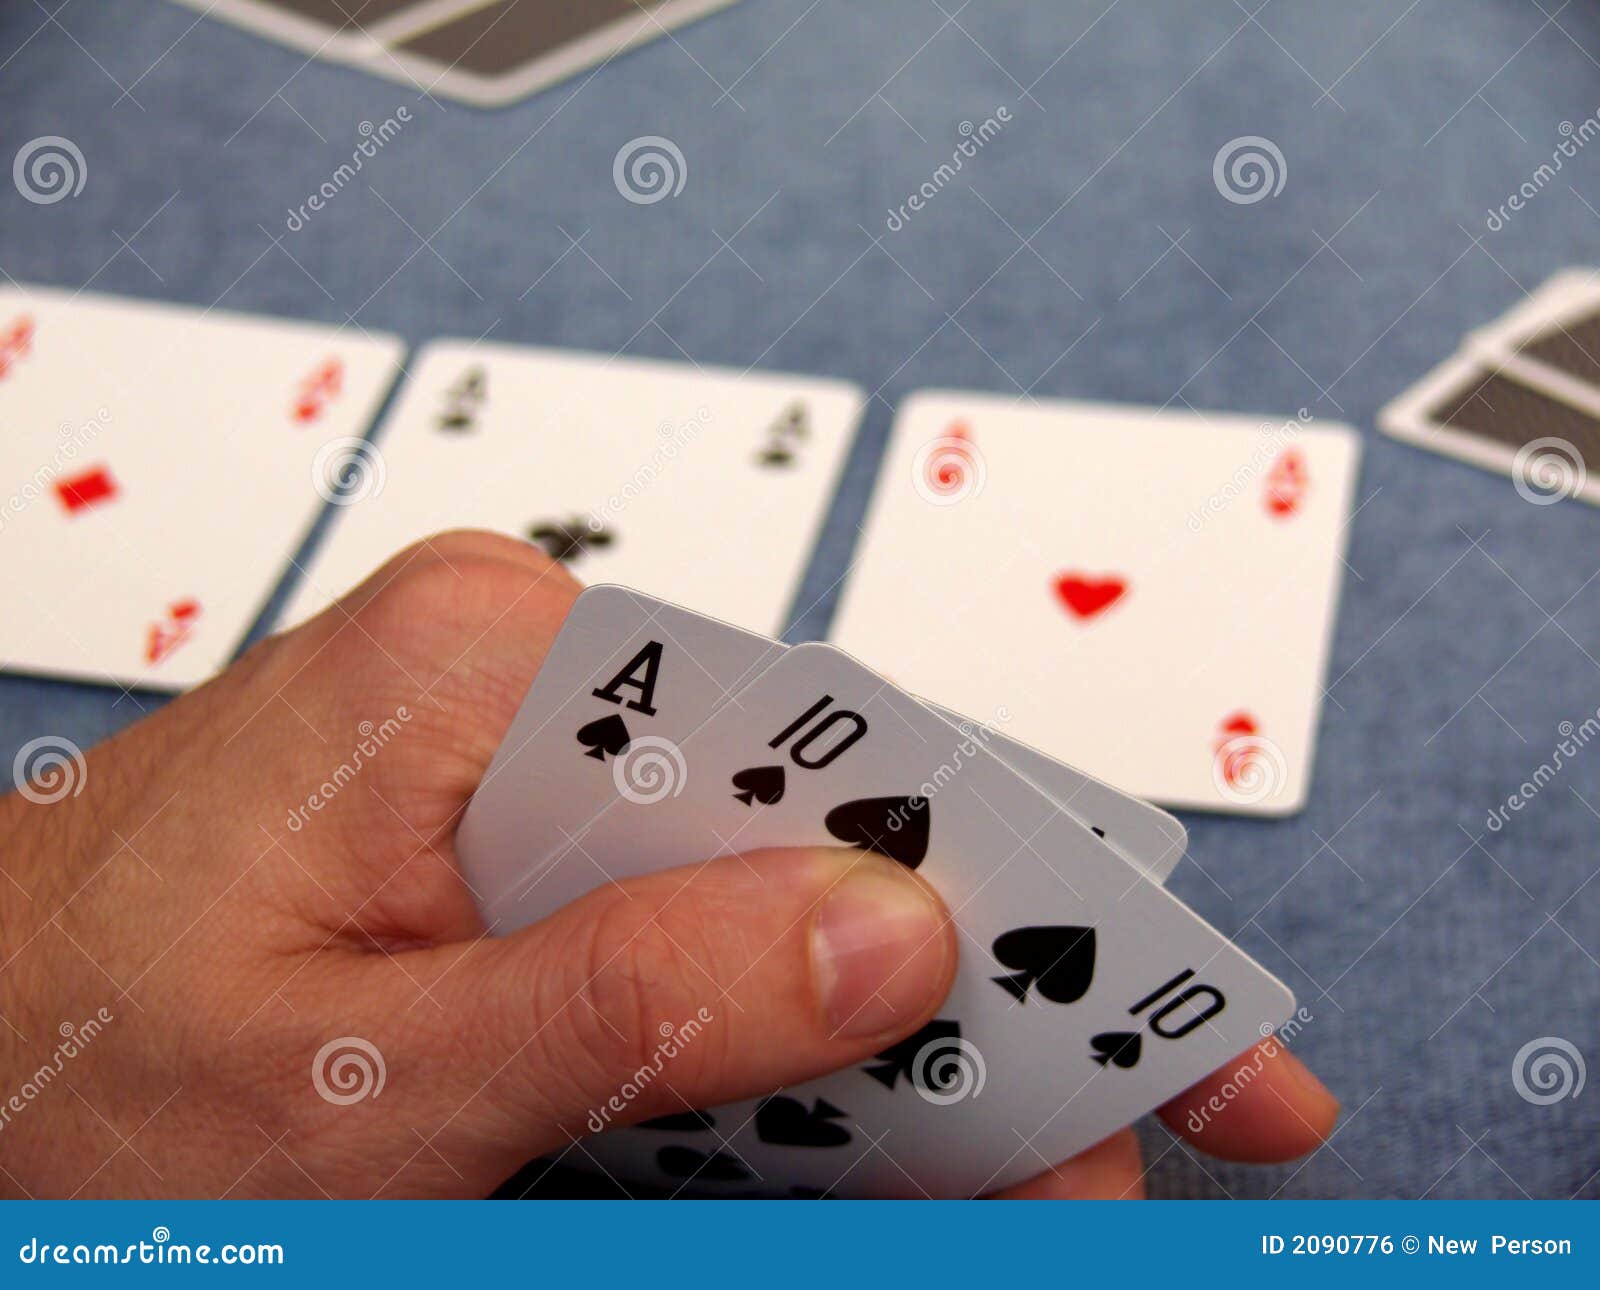 Poker - 2 cards stock photo. Image of jack, active, playing - 2090776